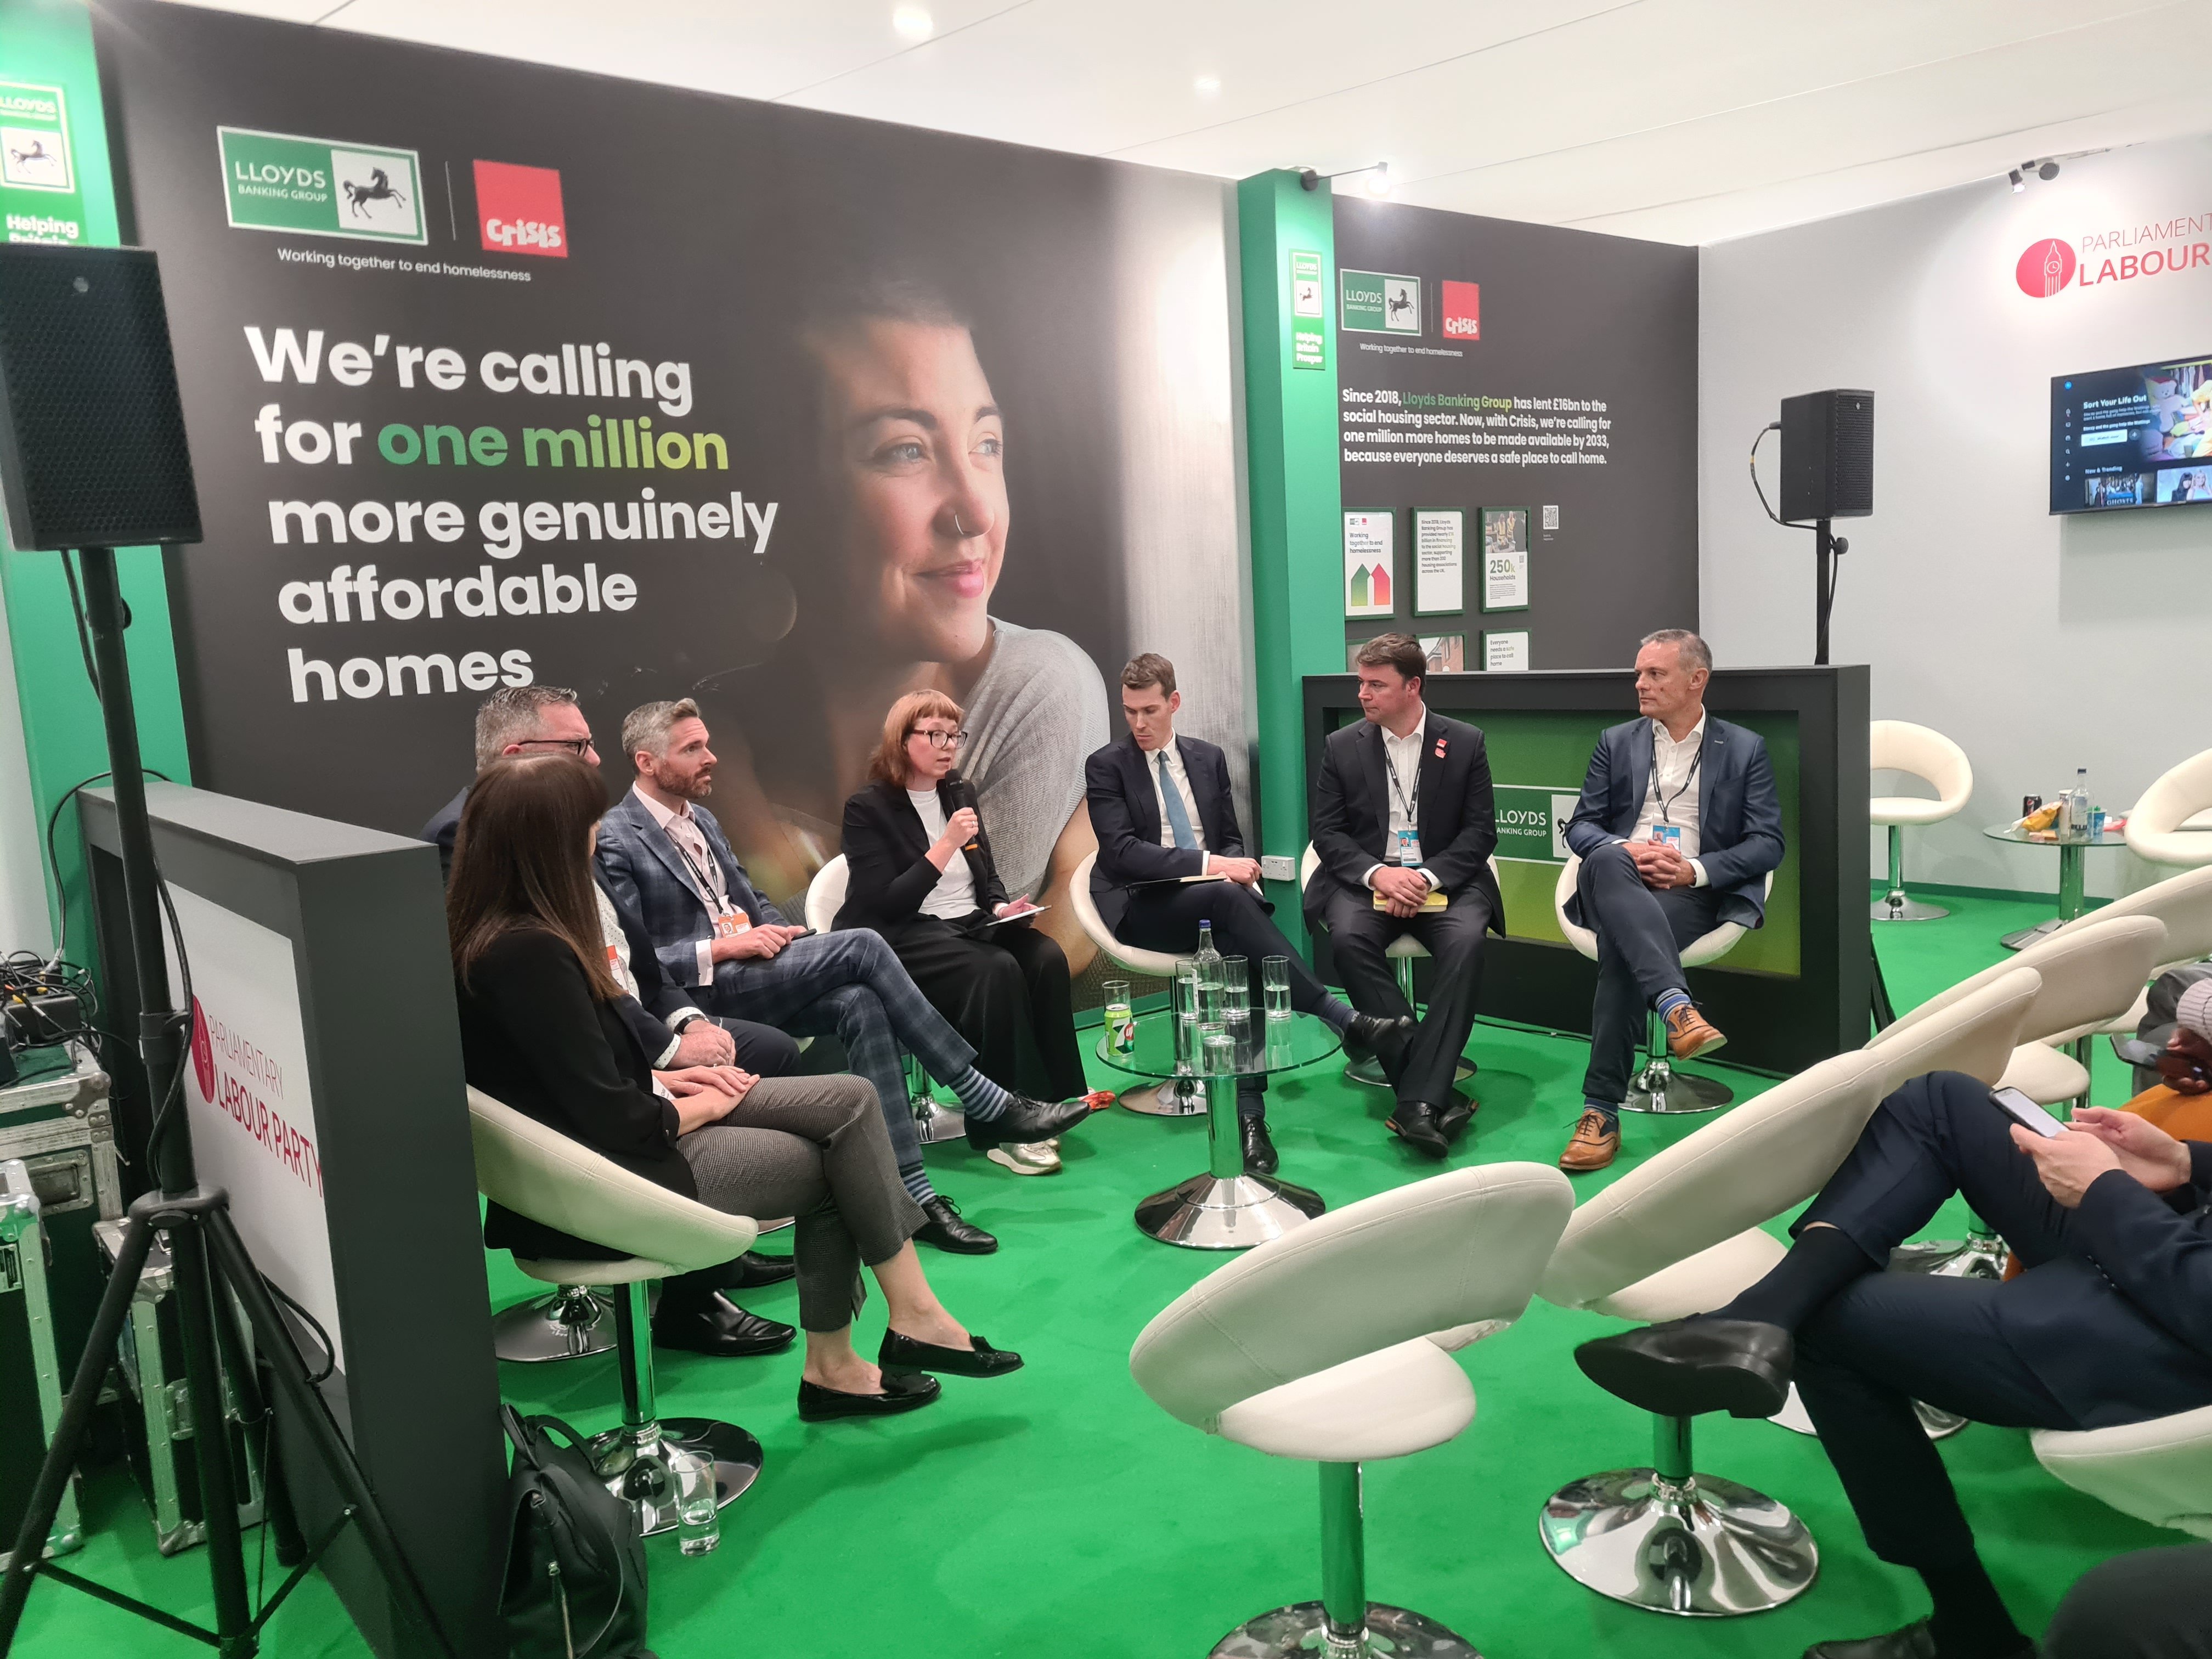 Seven panellists sit in front of a Crisis and Lloyds Banking Group branded campaign banner.